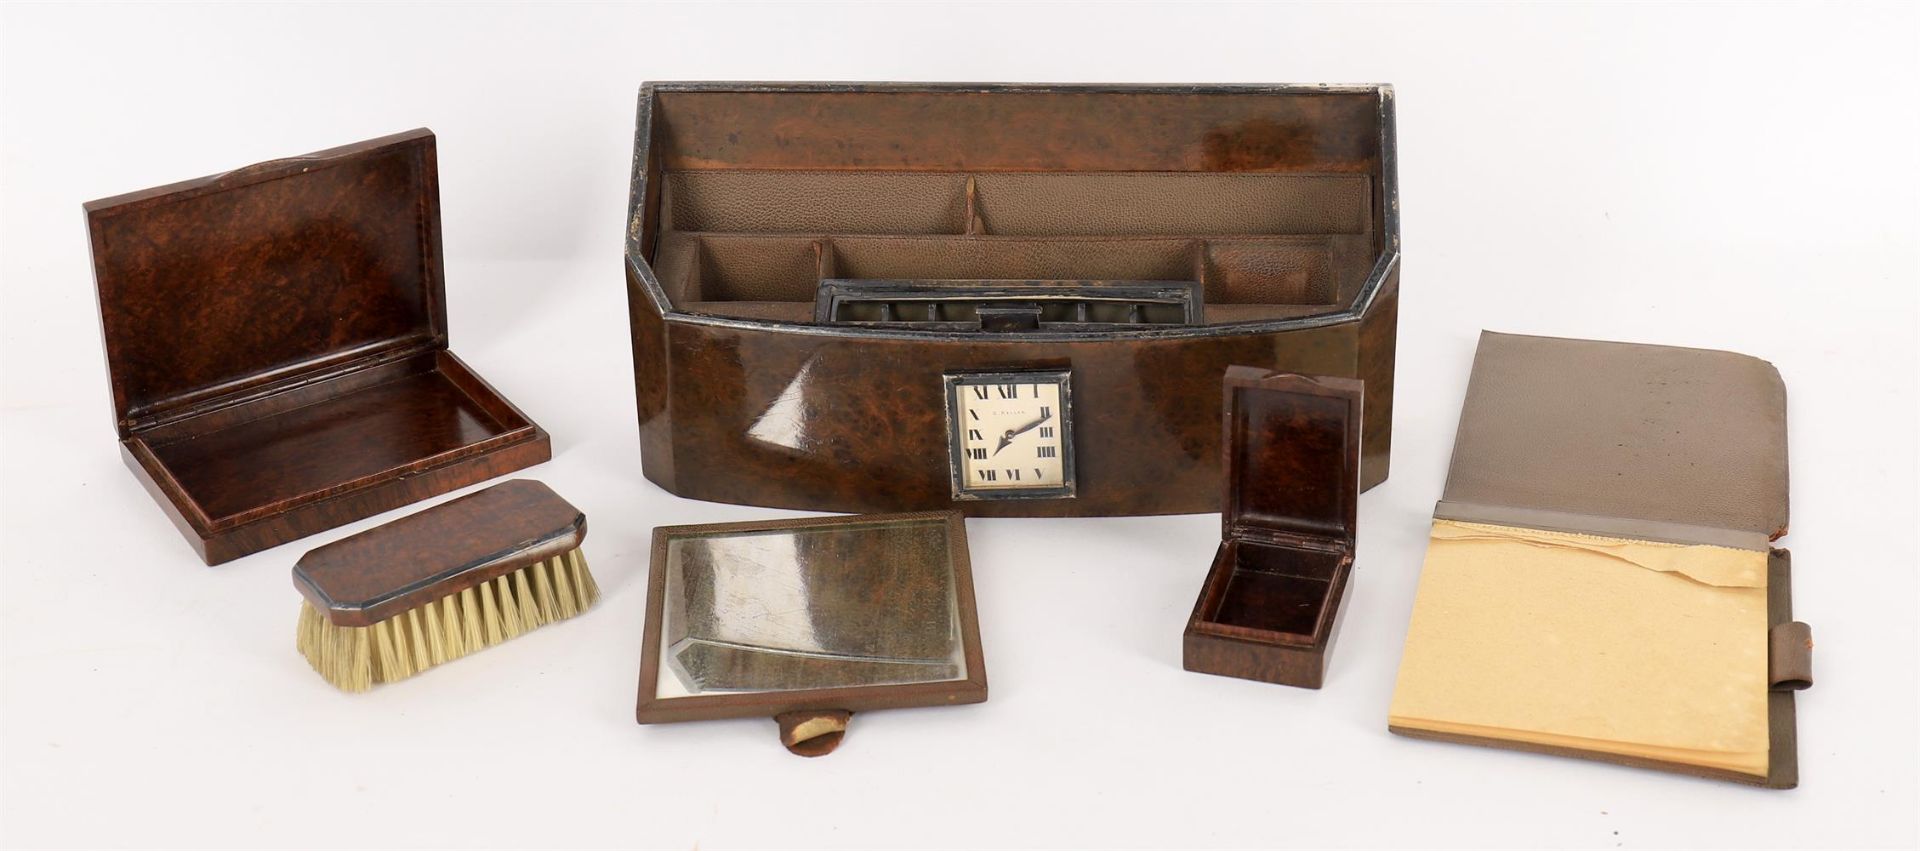 Gentleman's picnic/motoring ware including leather cased set of two plated wine coolers by Zurcher - Bild 3 aus 6